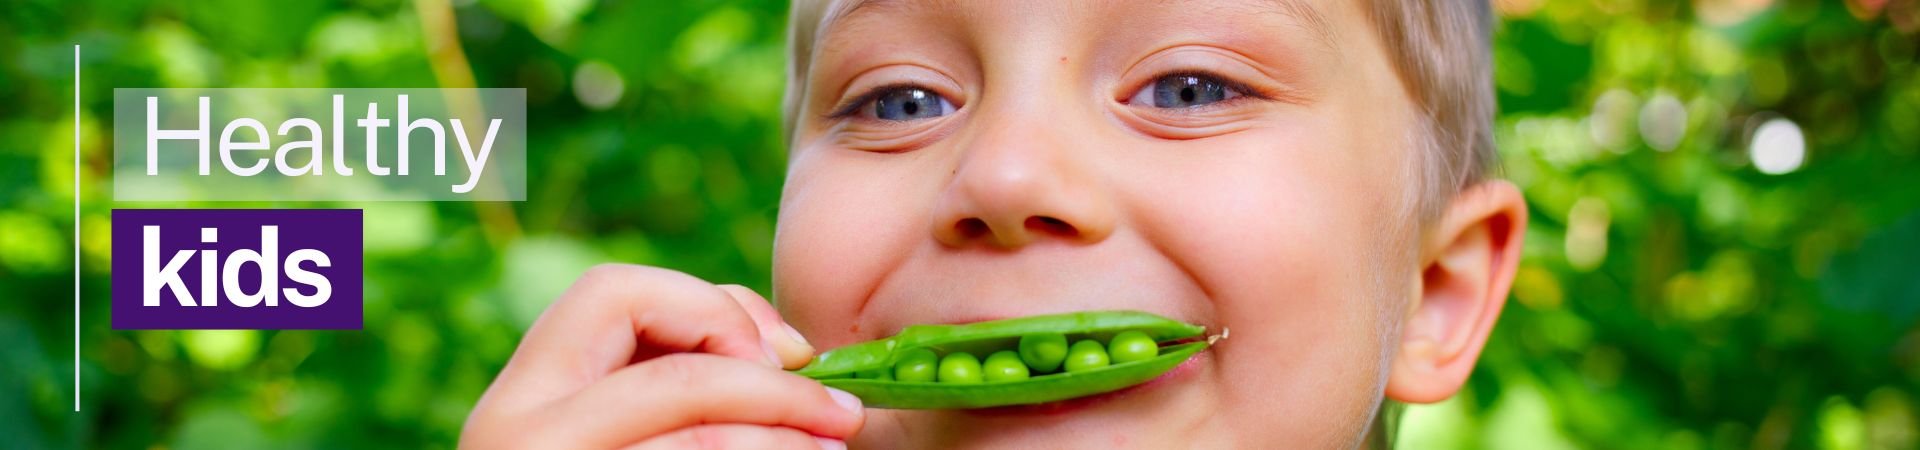 Banner of healthy kids. Boy holding up a snow pea to his mouth. 